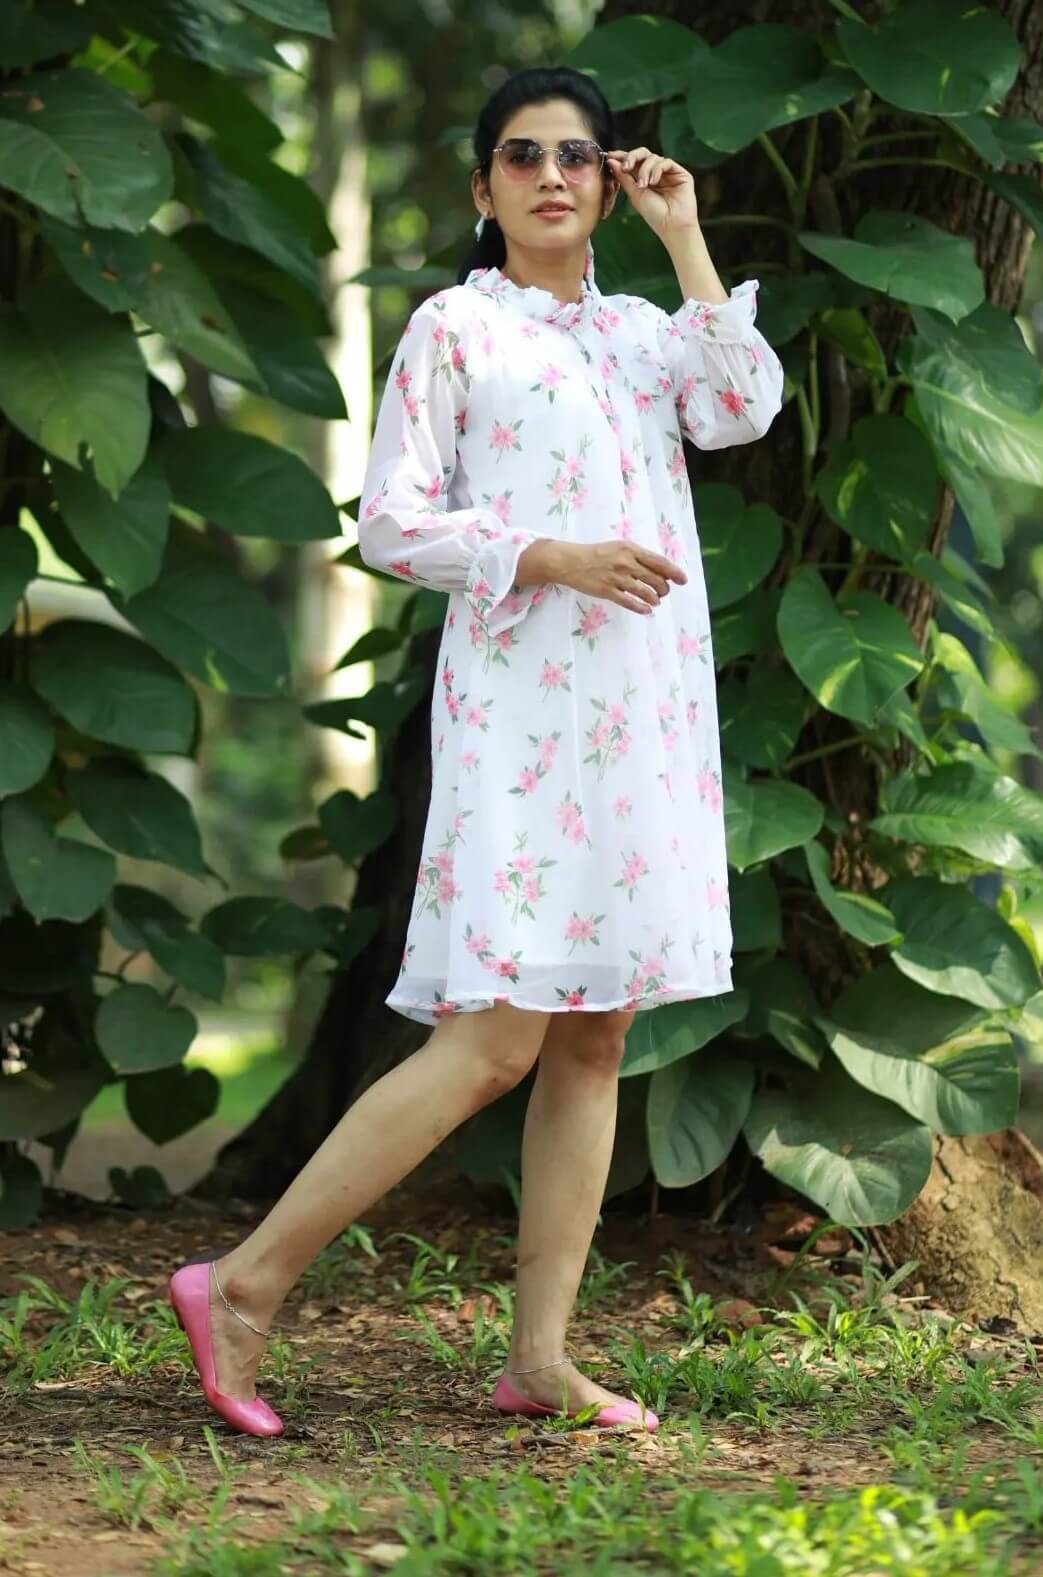 Sshivada Casual Picnic Ready-Go-To Look In White Floral Printed Short Dress